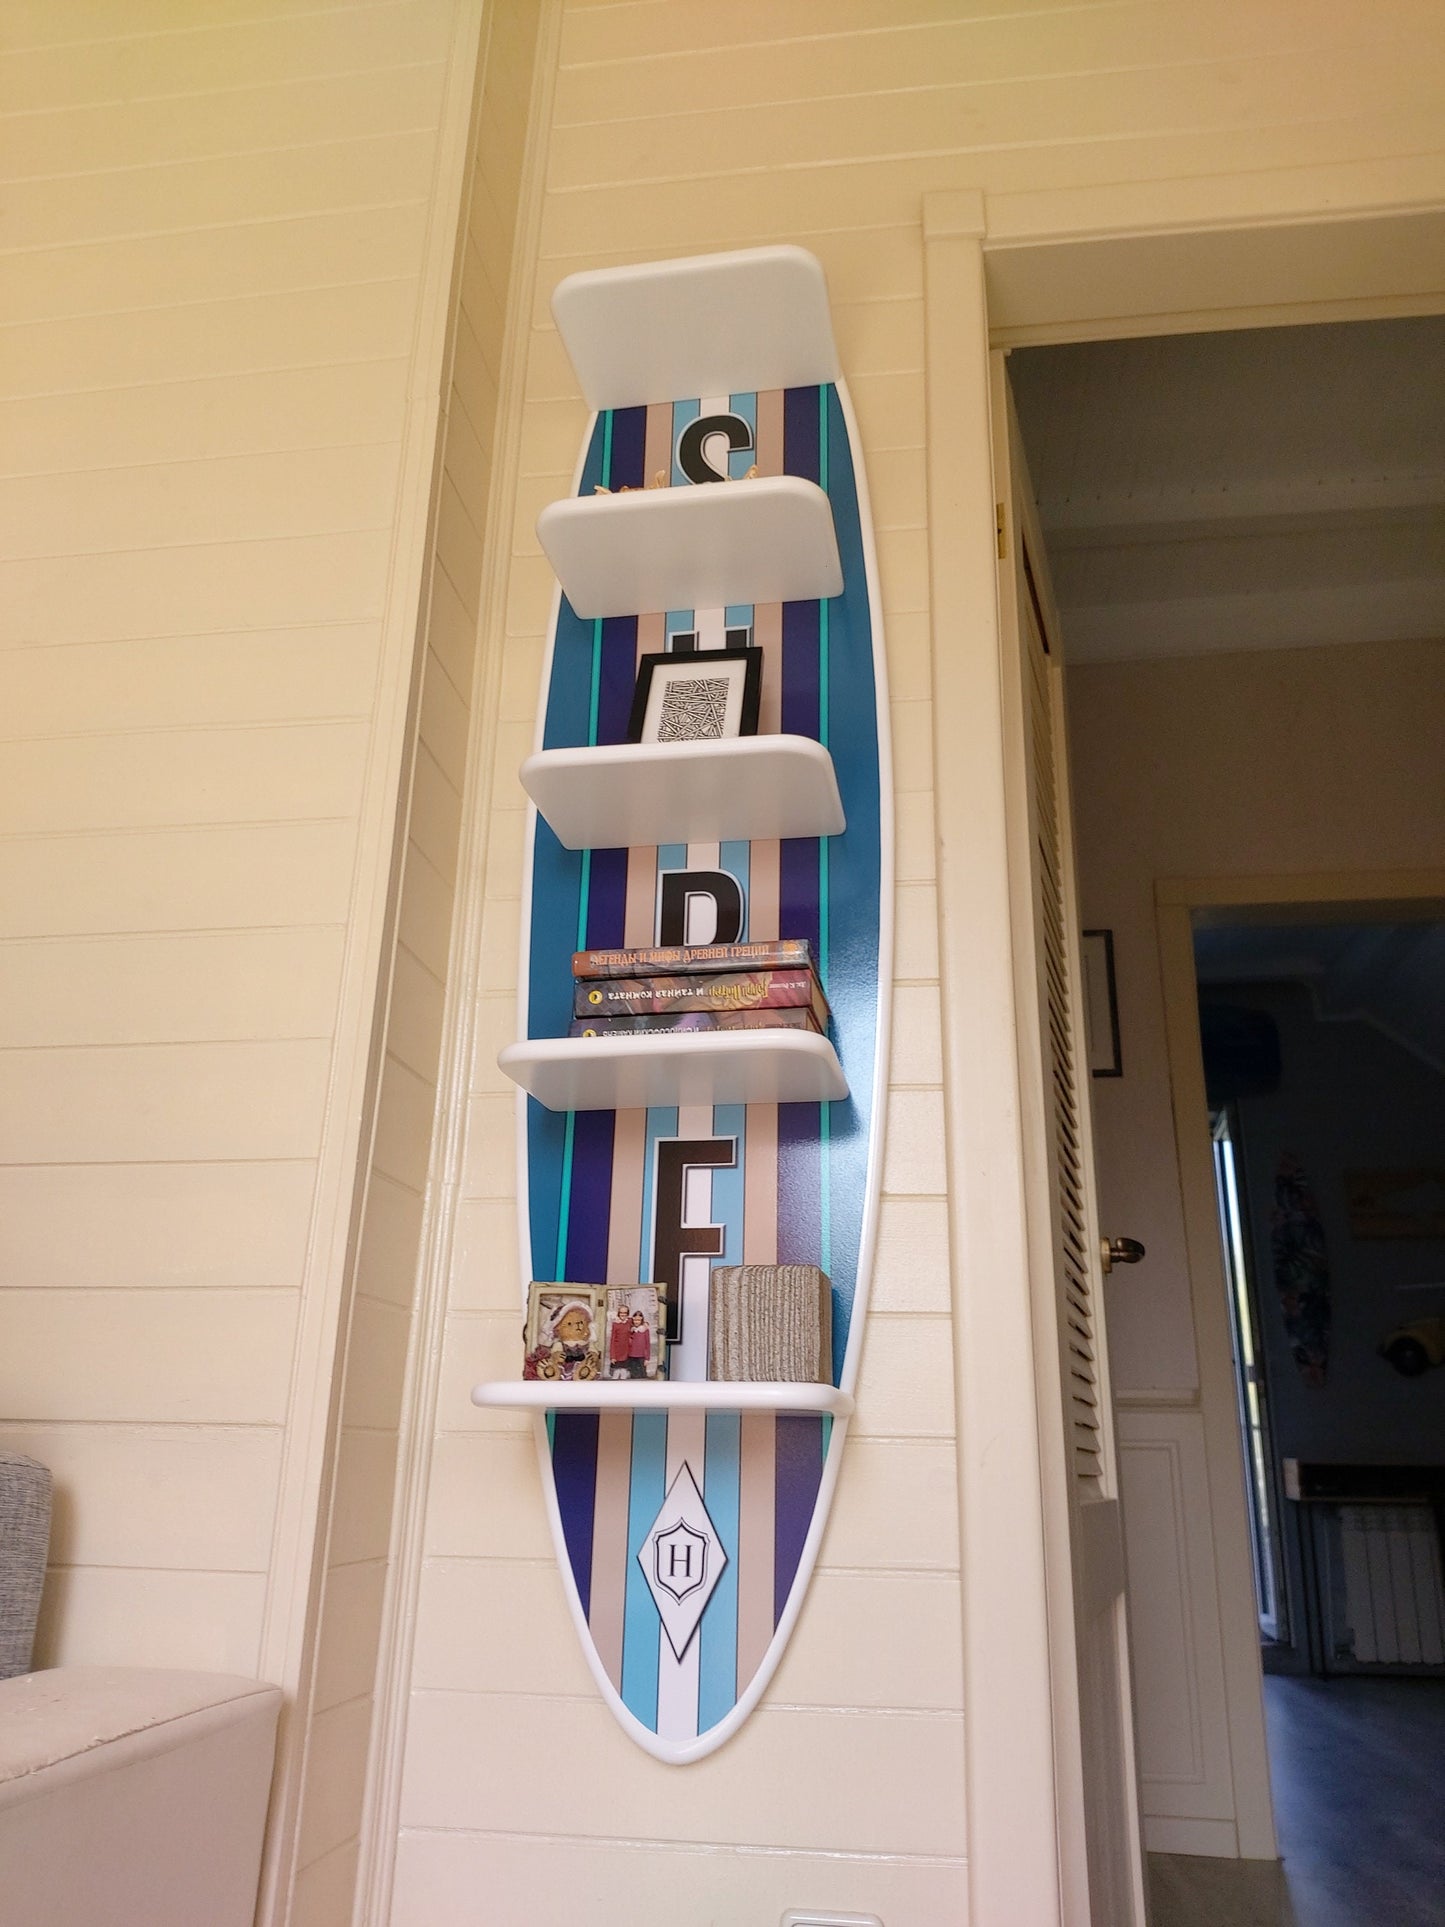 Surfing Inspired Vertical Hanging Shelf in White, Brown Colours for Nautical Wall Decor